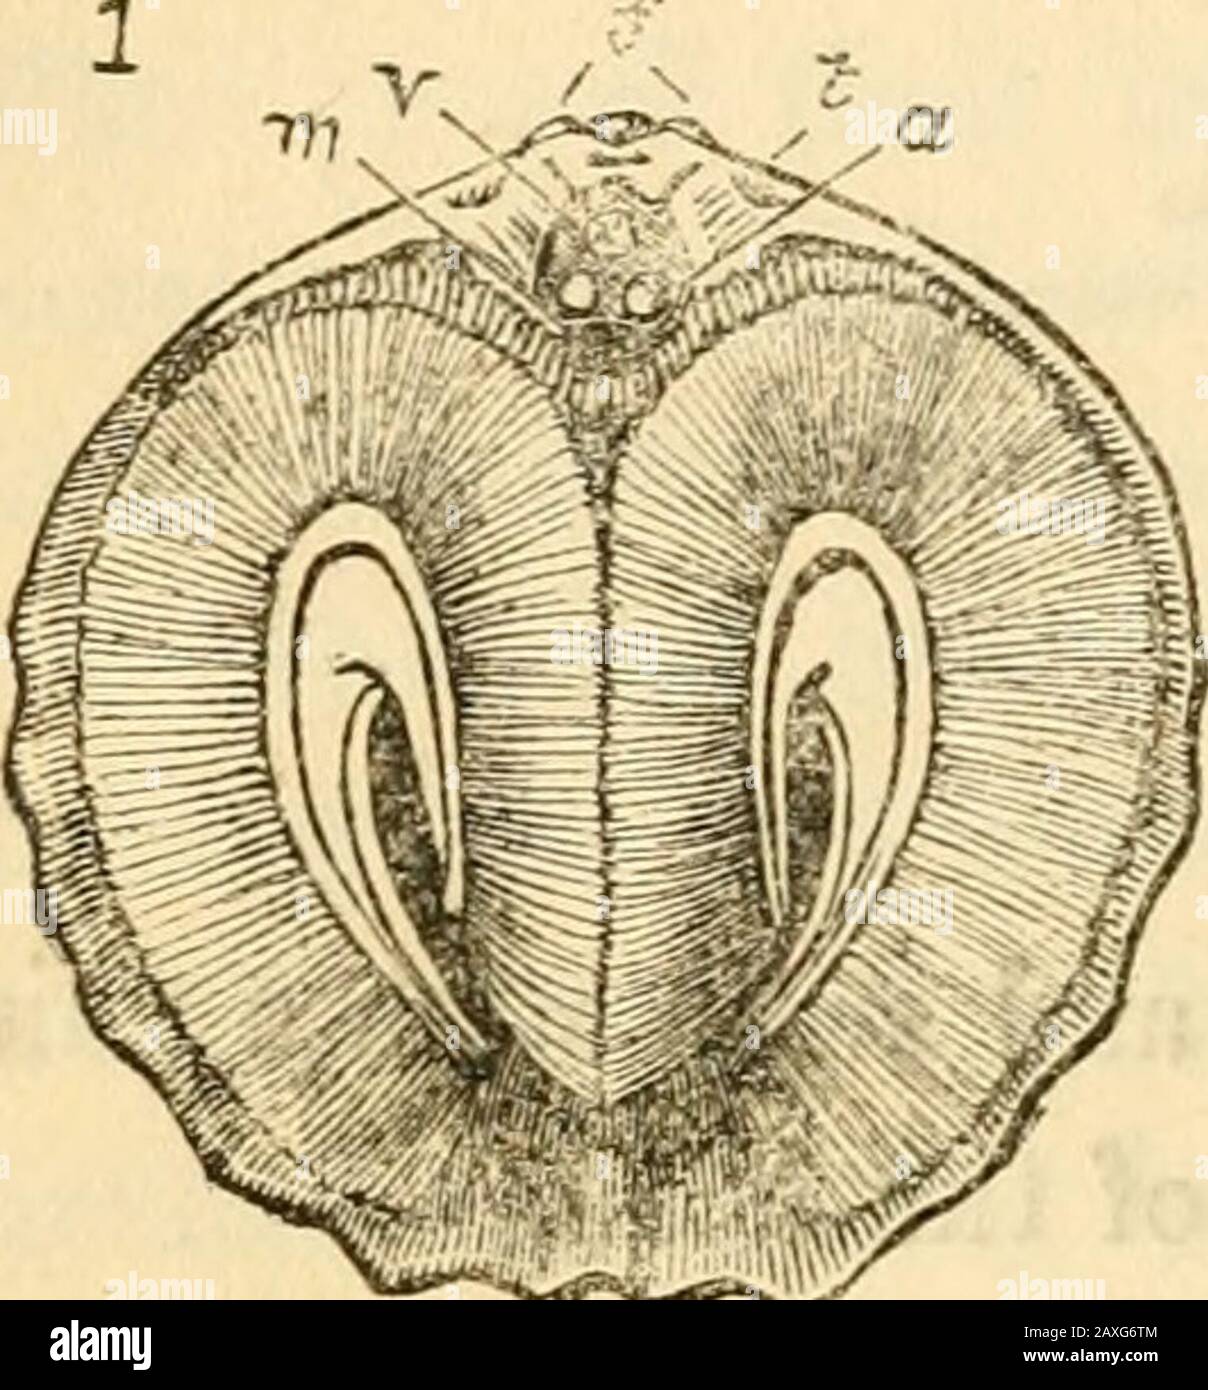 A manual of the Mollusca, or, A rudimentary treatise of recent and fossil shells . Fig. 3. A Fteropod. § The other mollusca ai-e acepJialoKS, or destitute of any dis-tinct head; they are all aquatic, and most of them are attached,or have no means of moving from place to place. They are di-vided into three classes, characterized by modifications in theirbreathing-organ and shell. 4. The bracJdapoda^ are bivalves, having one shell placedon the back of the animal, and the other in front; they have no * Gaster, the under side of the body. t Fig. 2. Helix desertorum. Forskal. From a Hving specimen Stock Photo